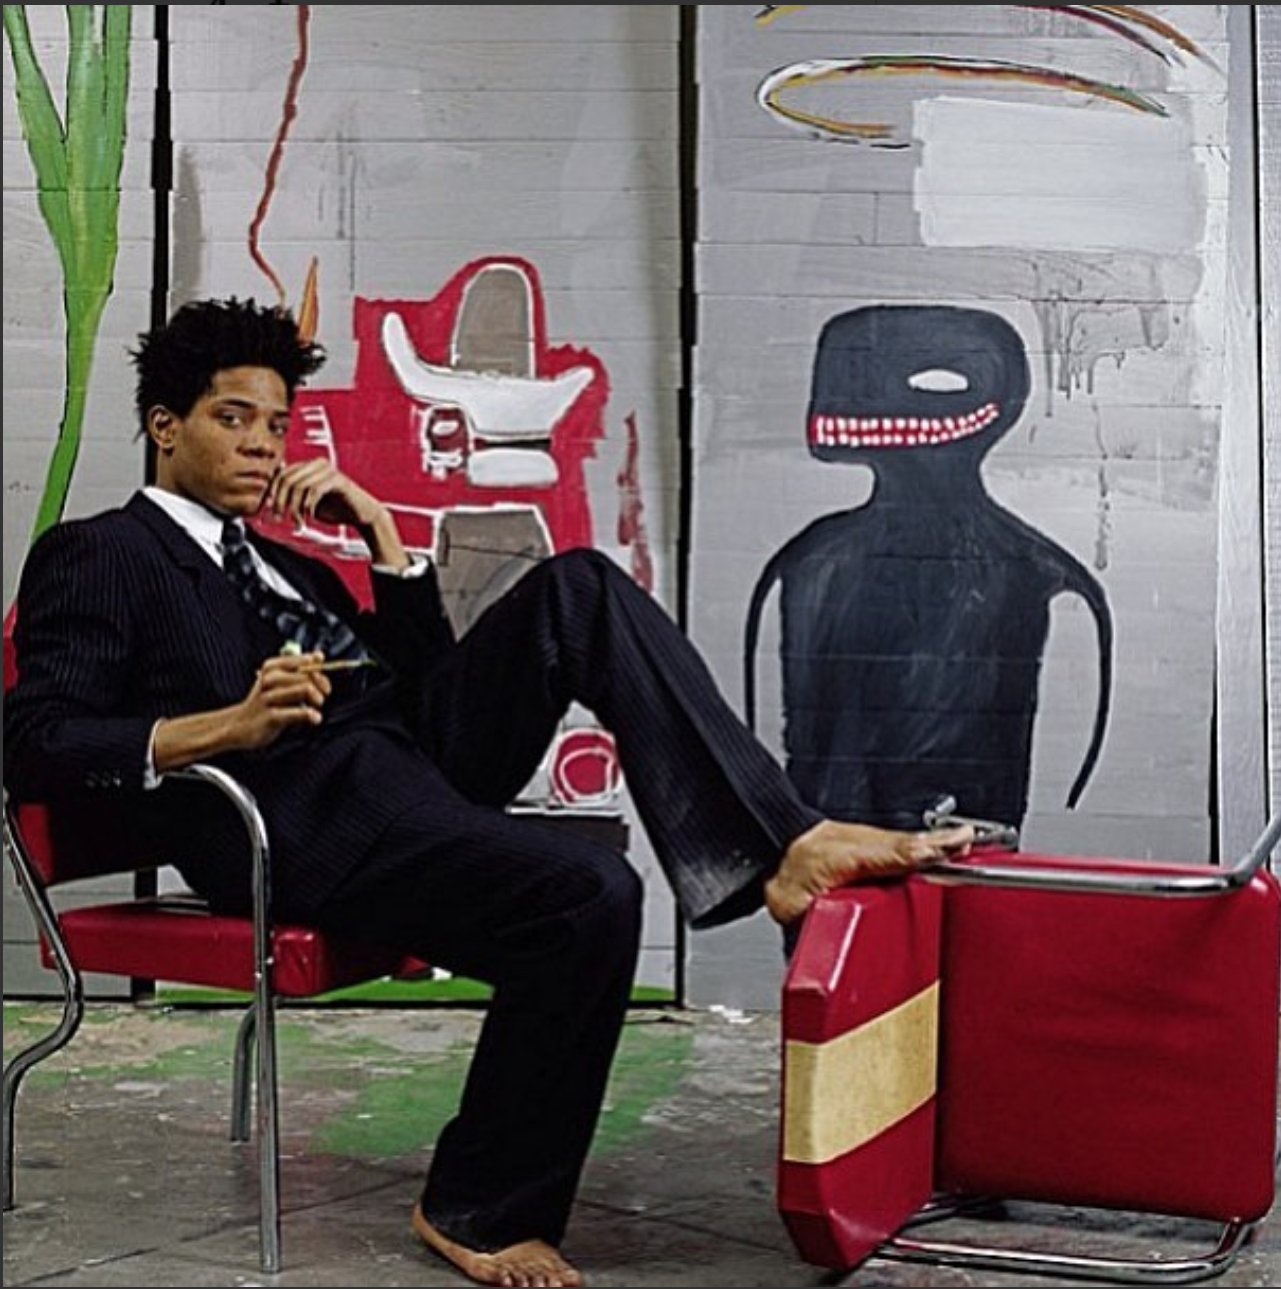 Basquiat reclining on a chair in front of art on concrete with a leg on a fallen chair.